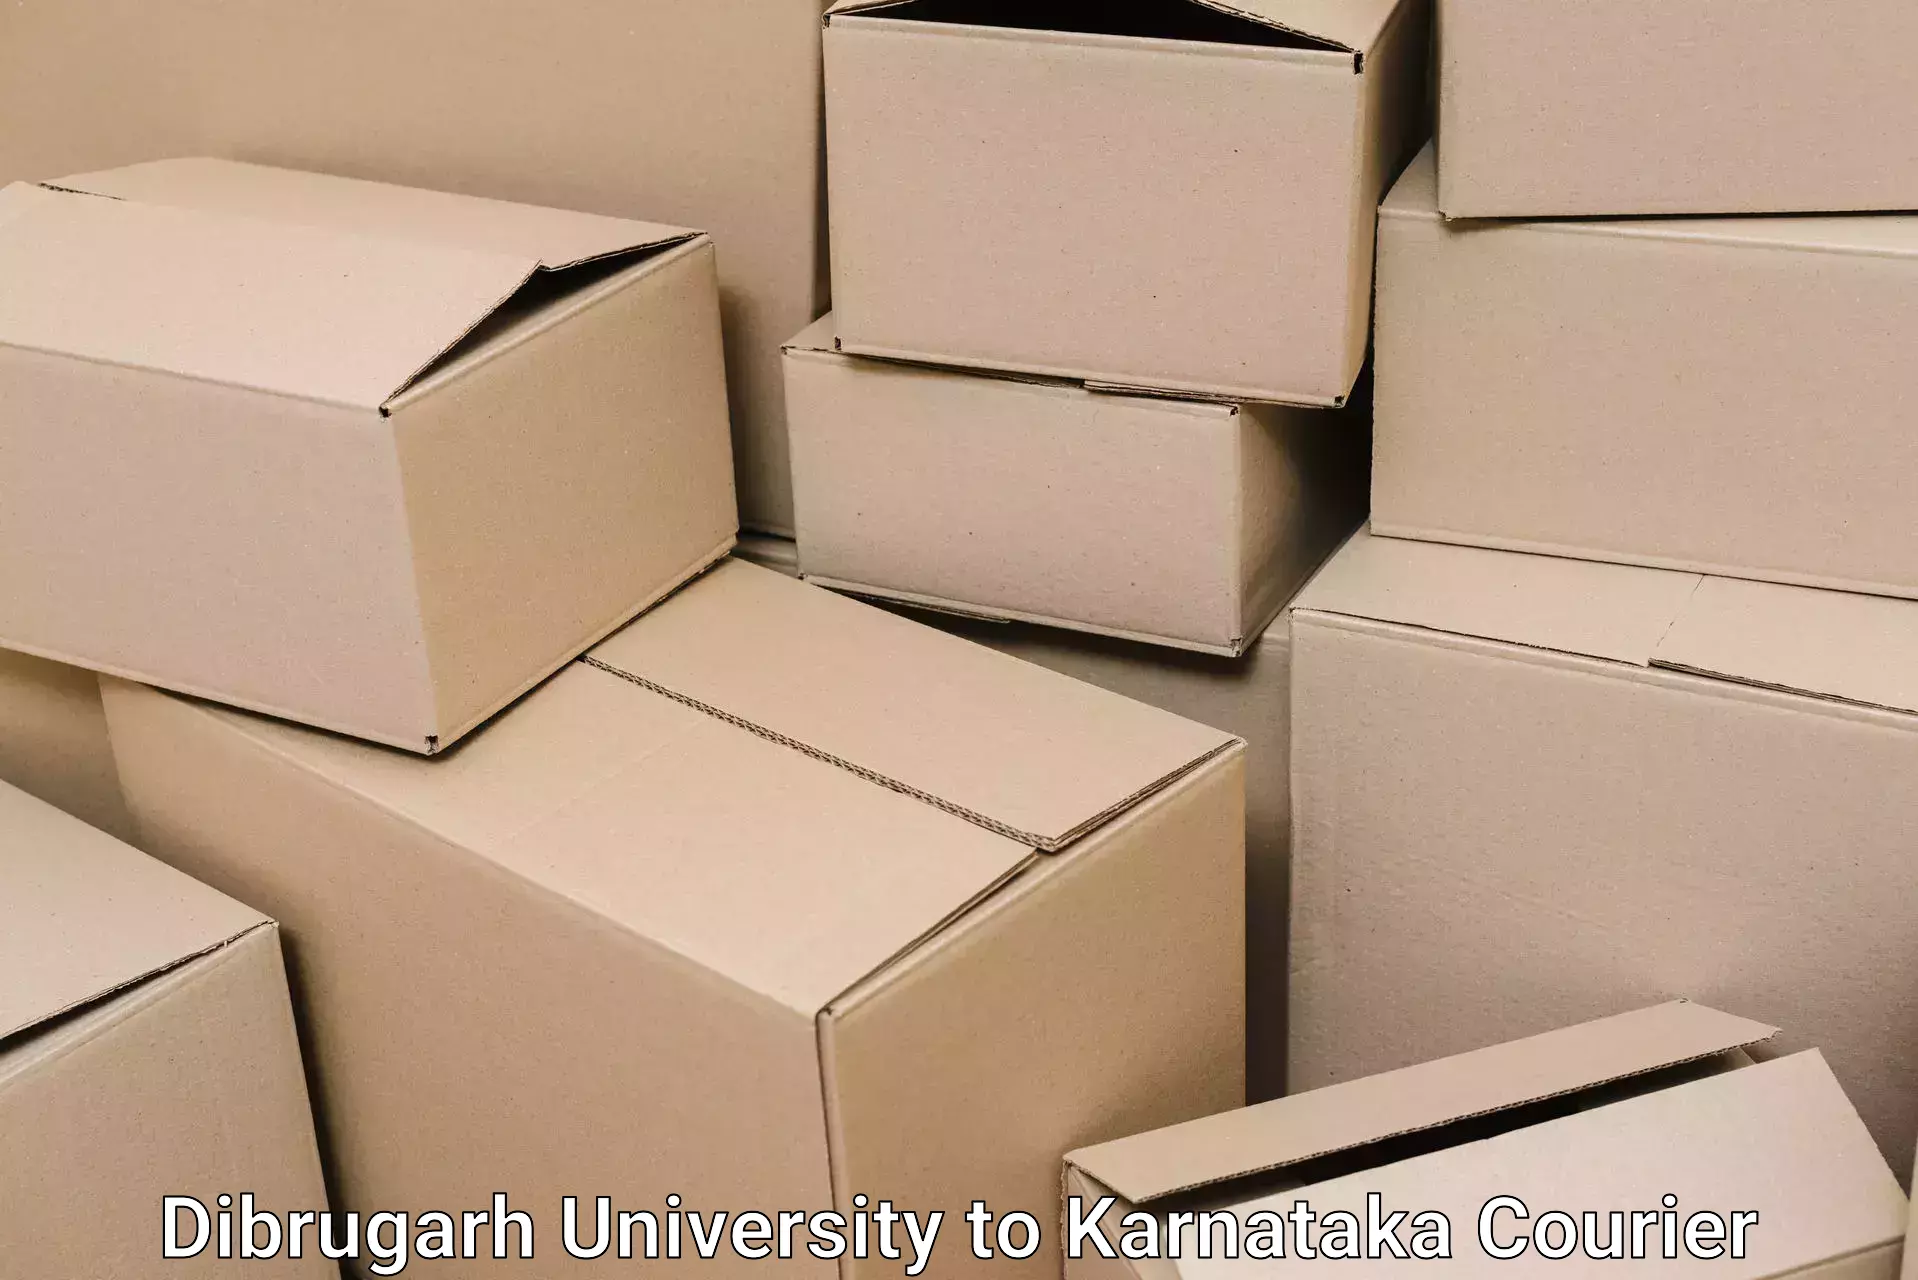 Quality relocation assistance in Dibrugarh University to Kollegal